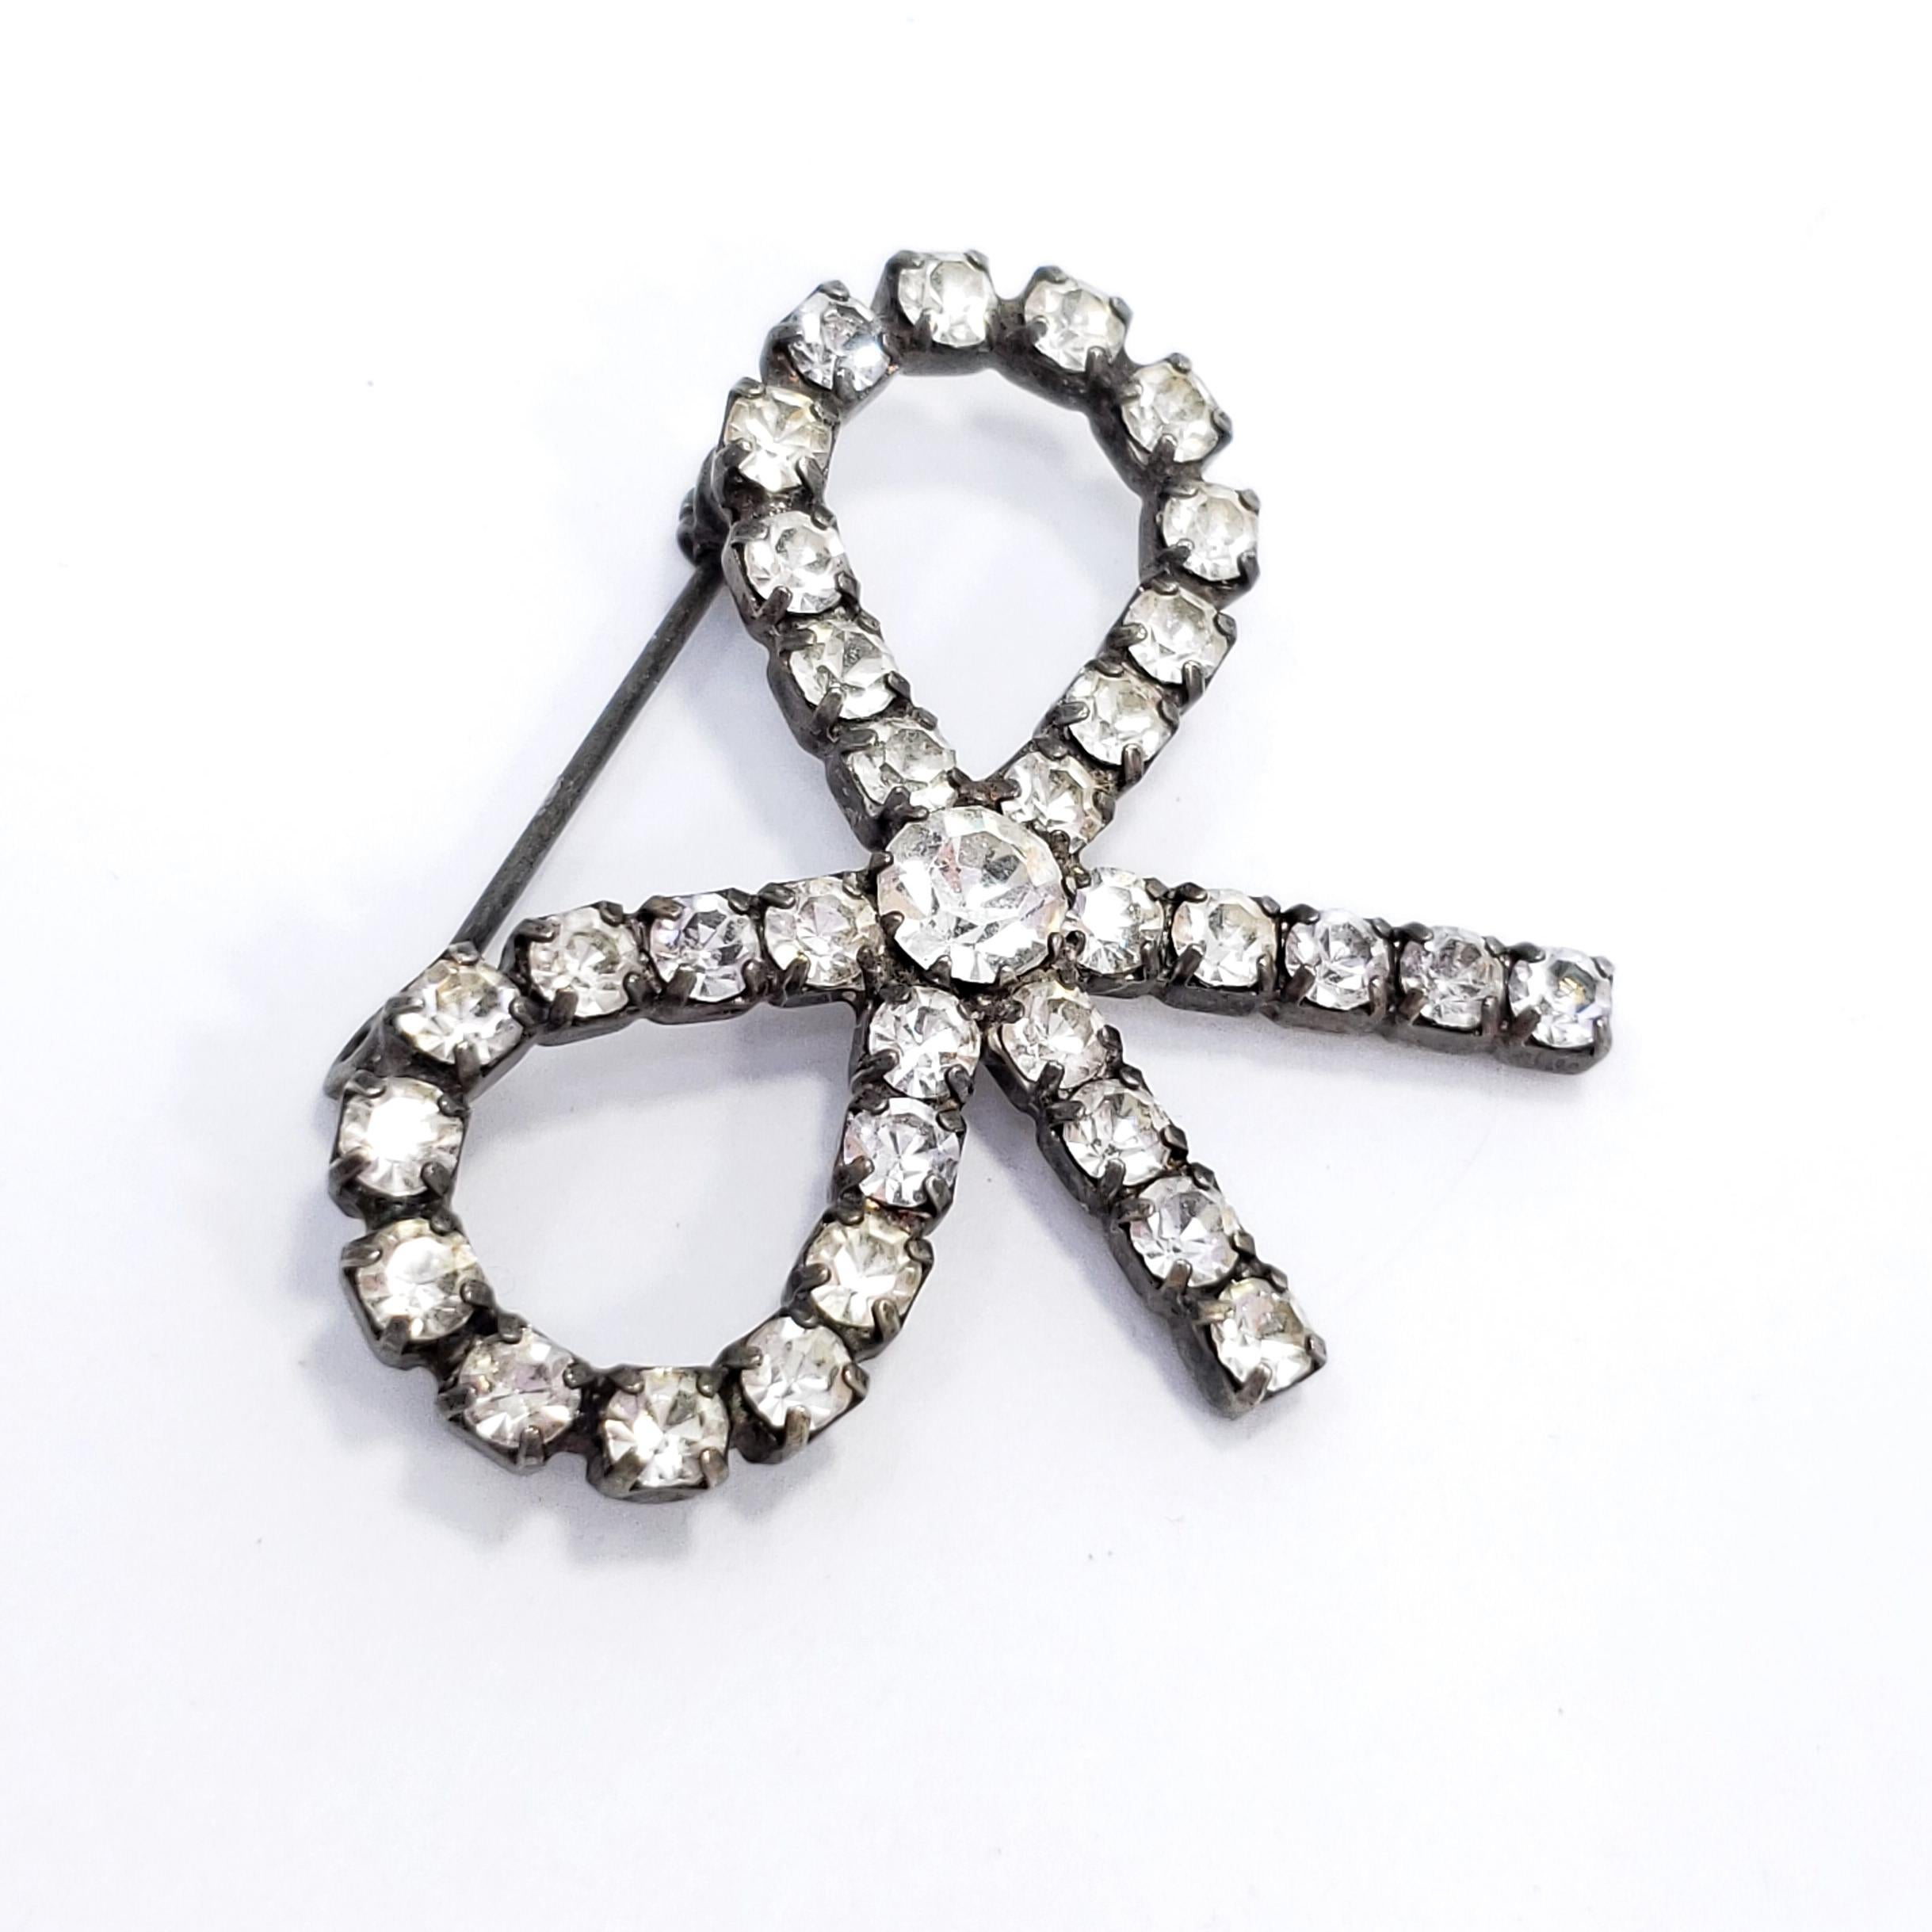 A stylish bow pin, decorated with sparkling crystals. A perfect touch of class!

Silver tone.